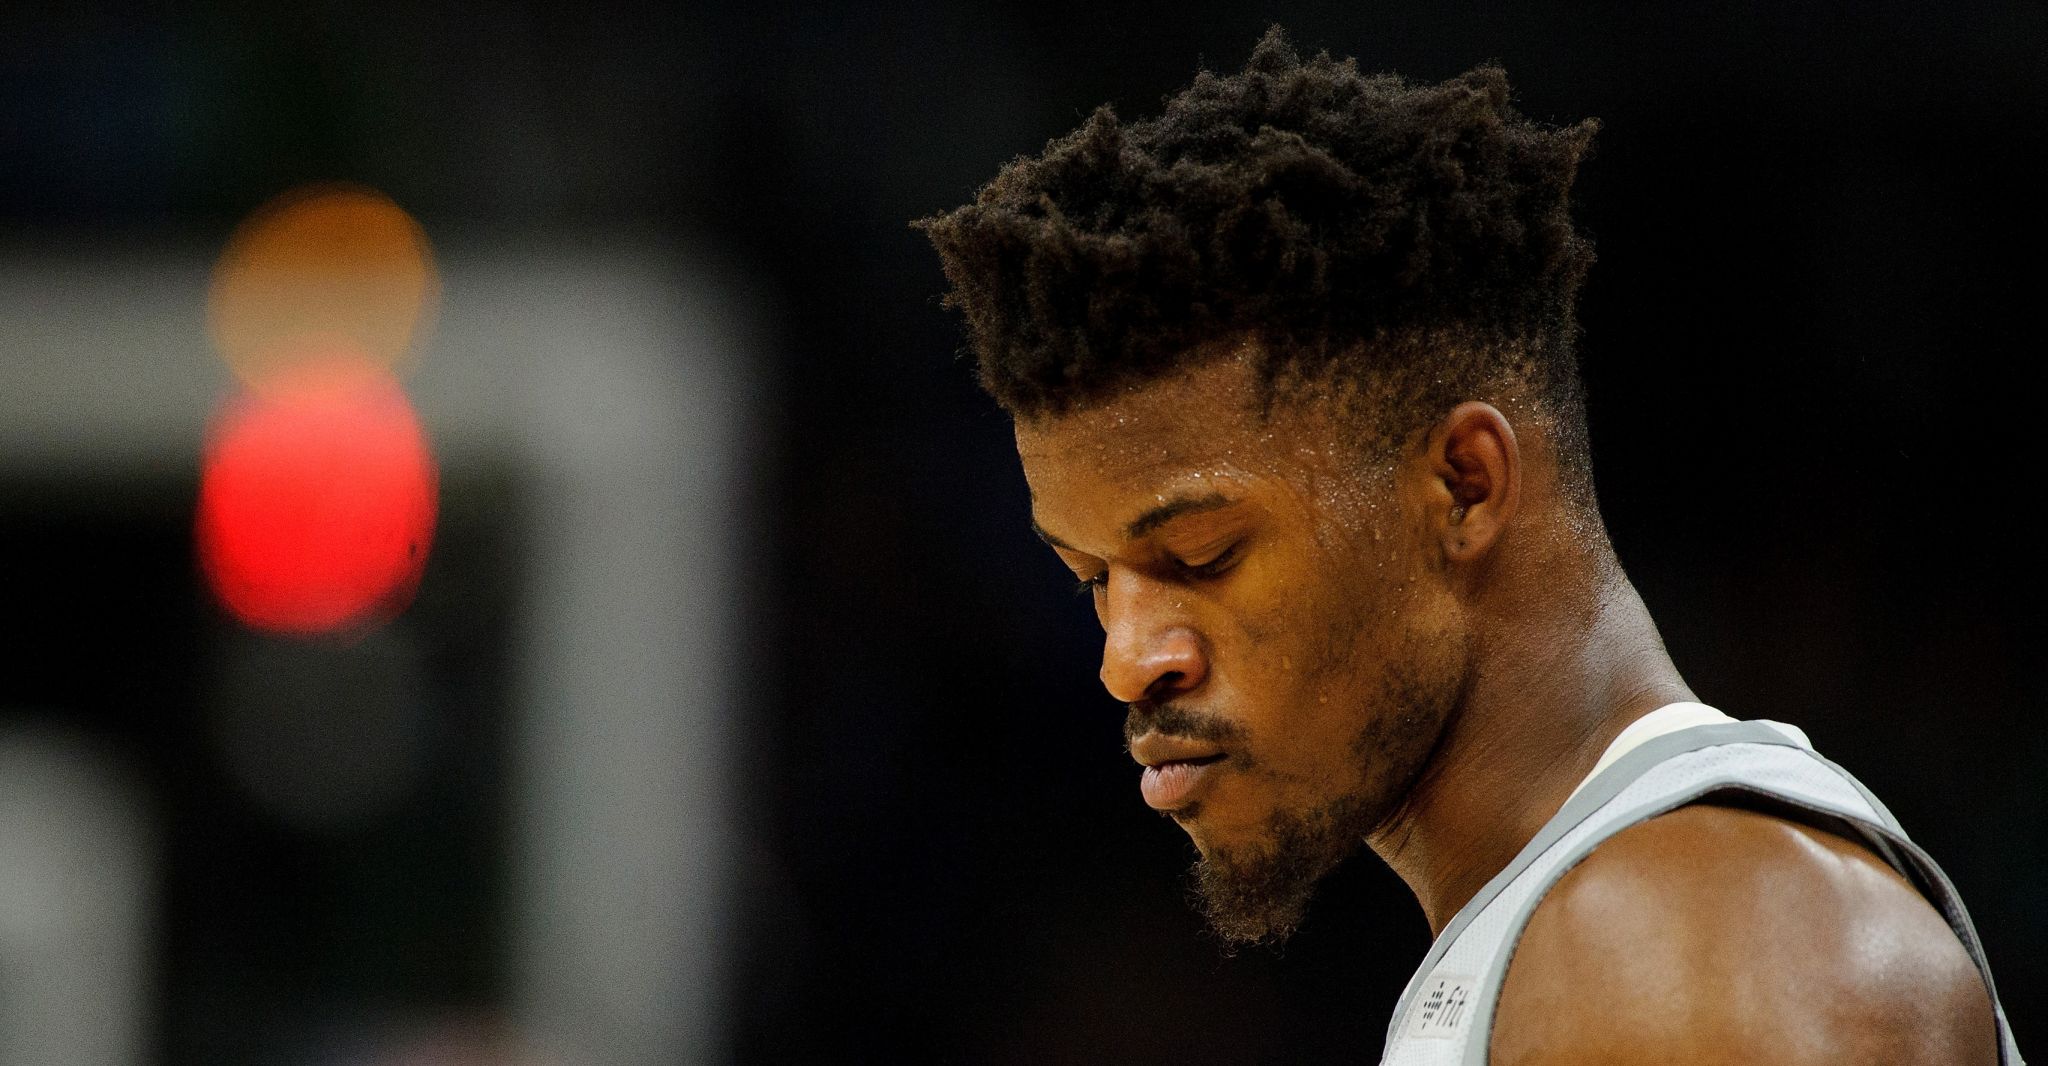 From Tomball to top tier: How tough times prepped Jimmy Butler for